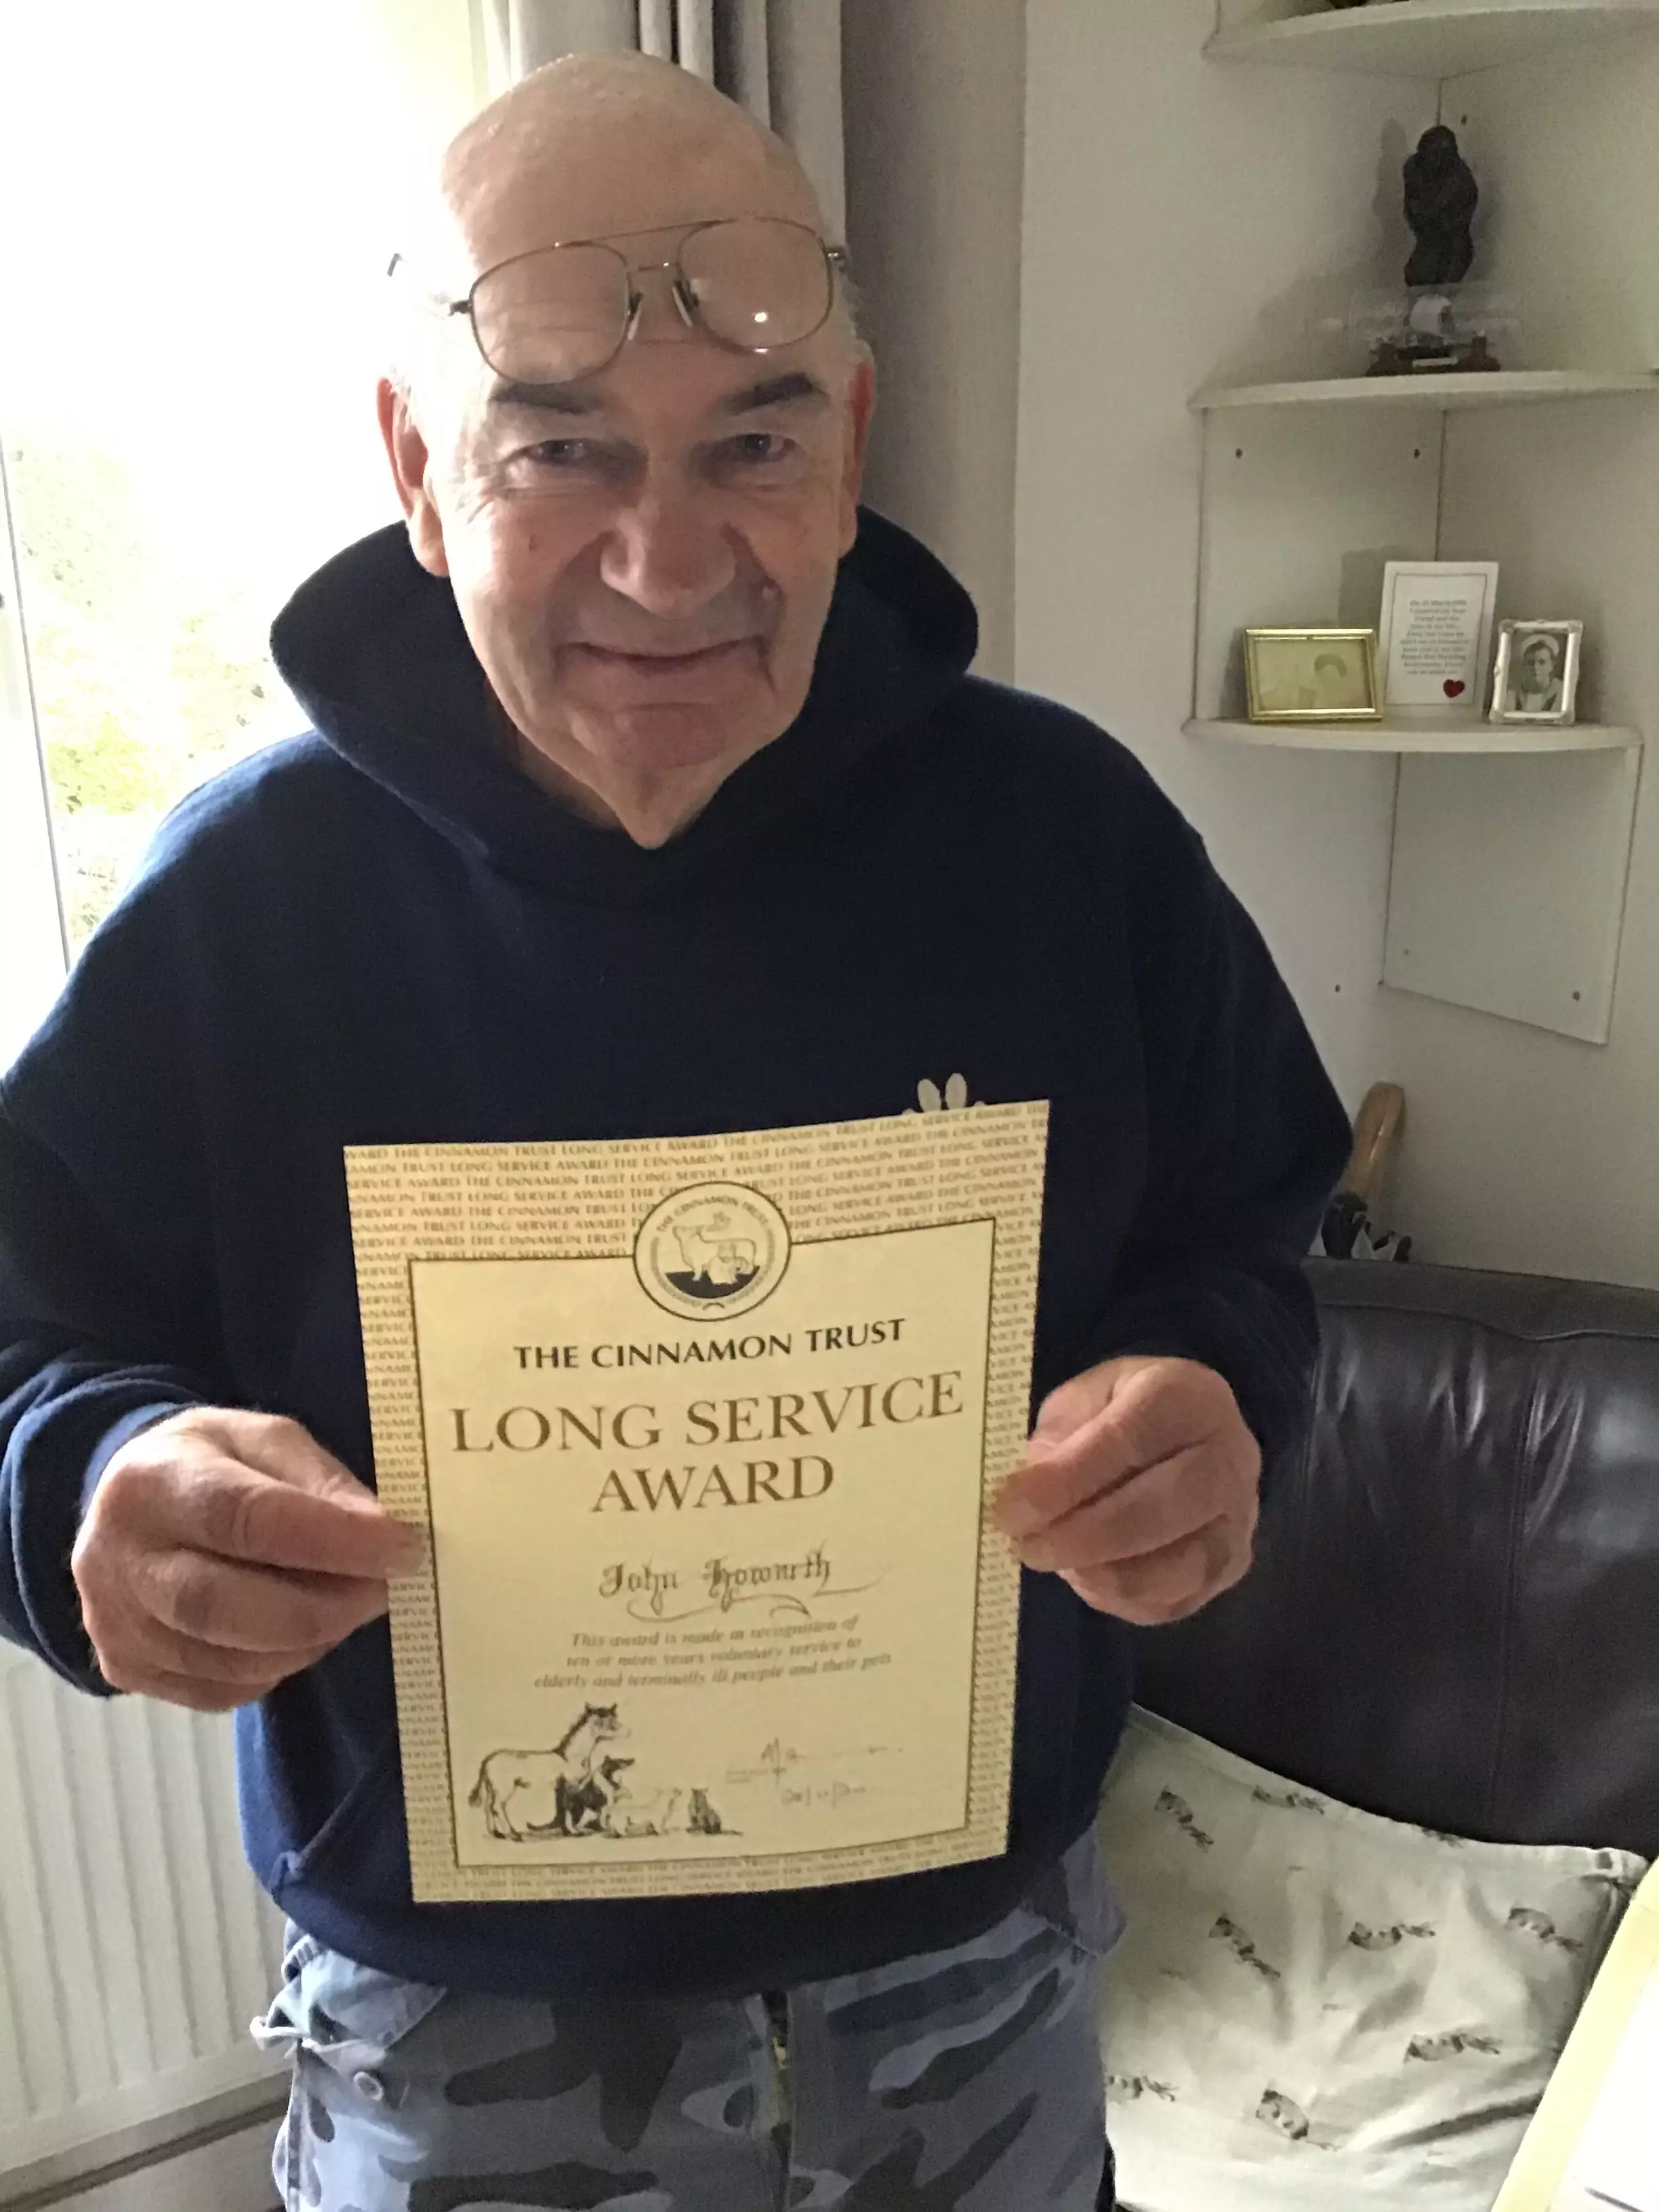 John received a long service award from The Cinnamon Trust.